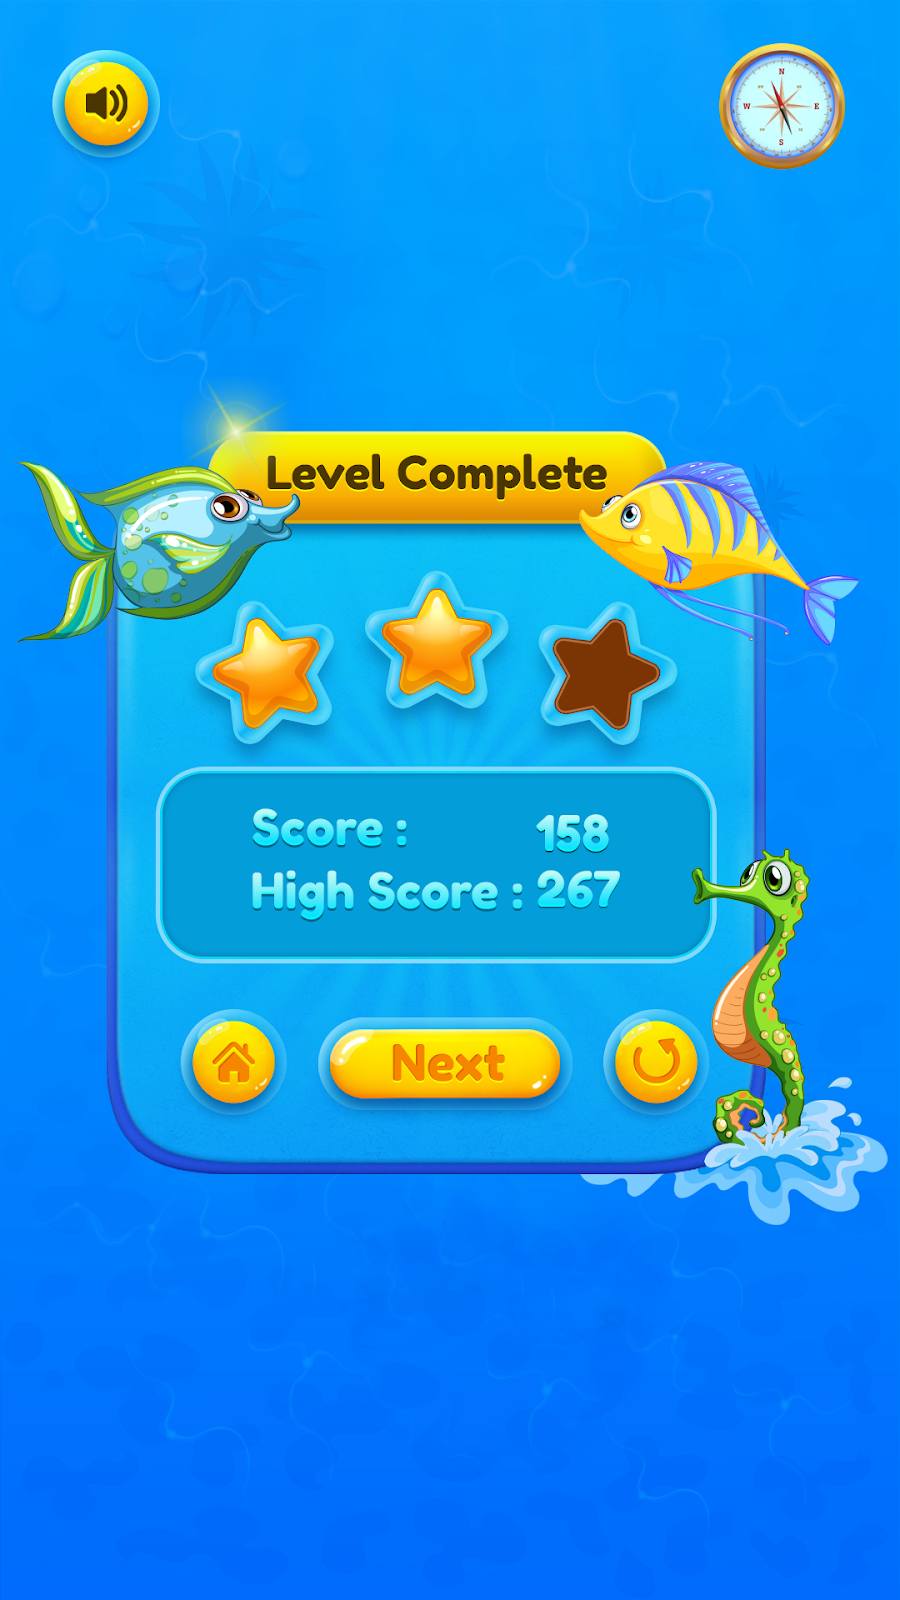 Level completed screen with compass